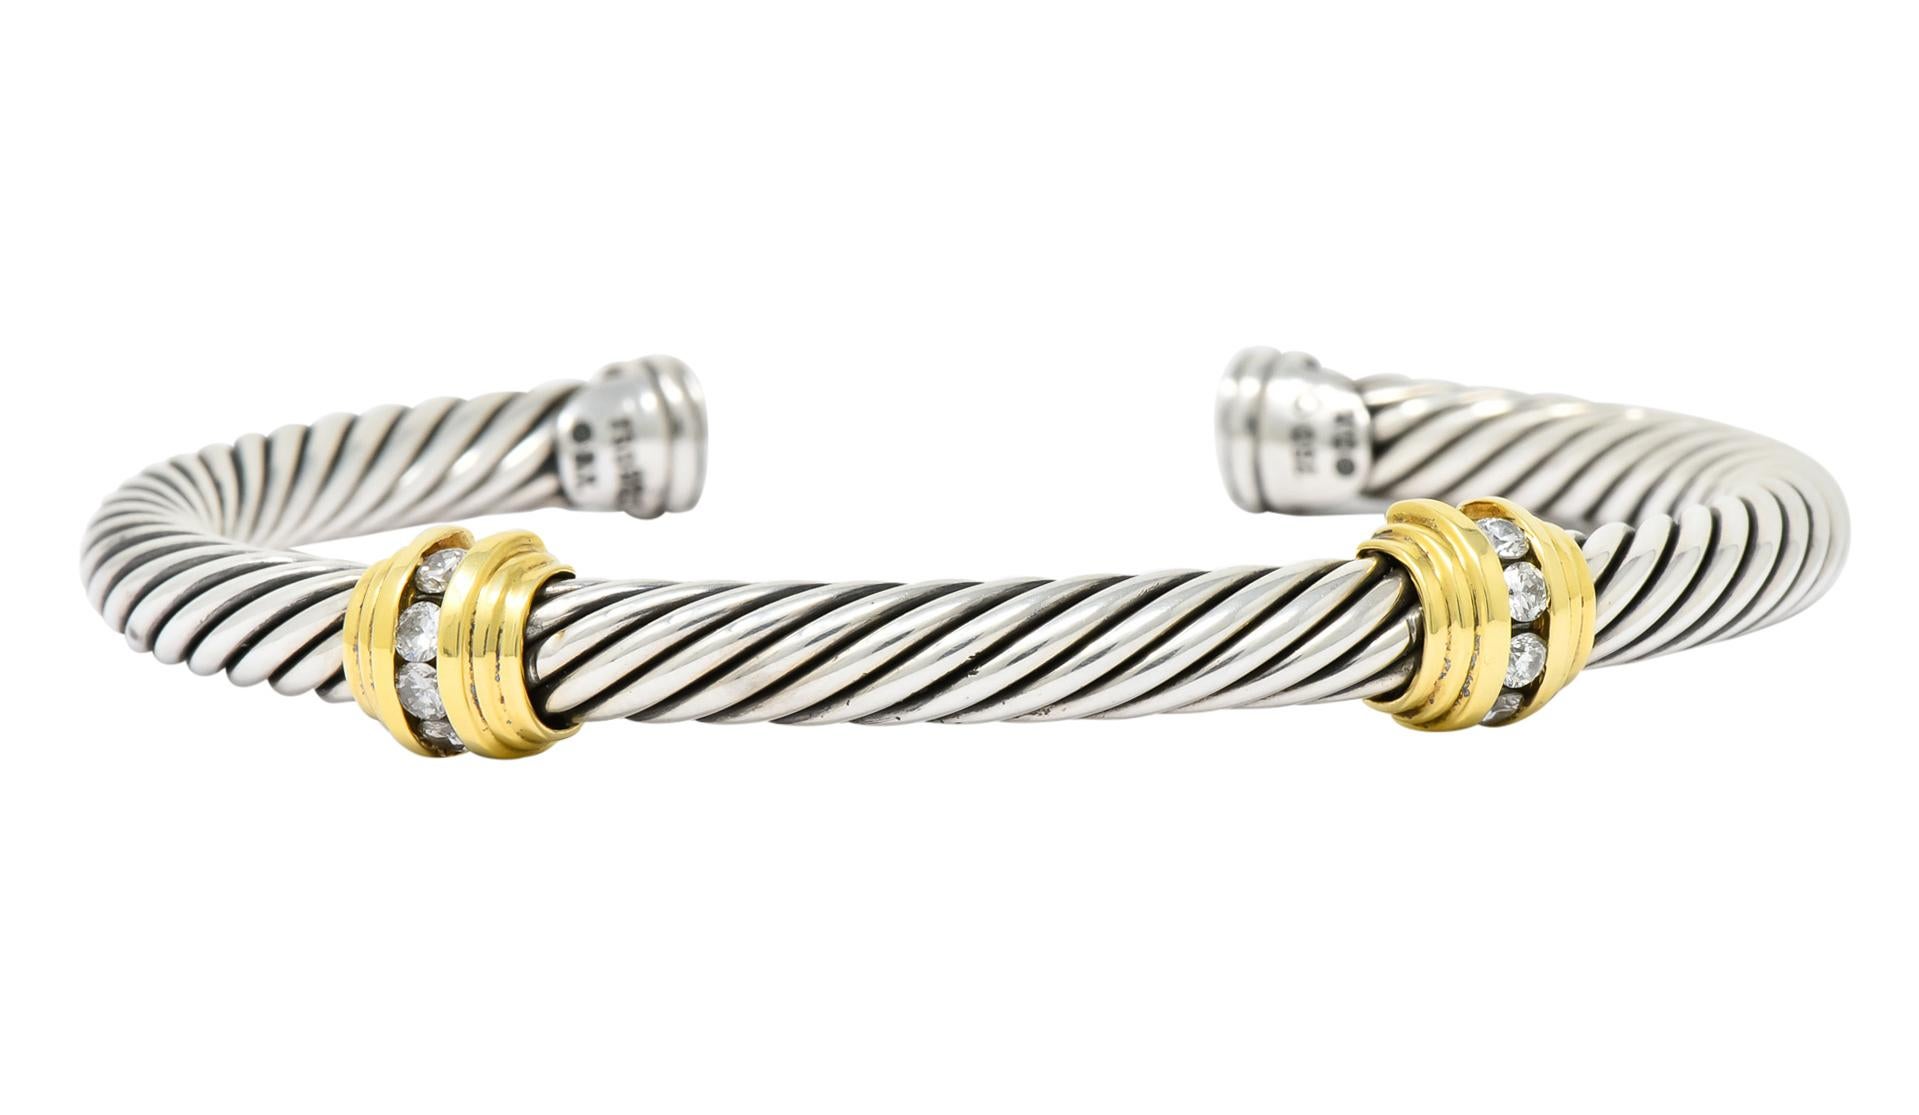 David Yurman classic cable twist sterling silver cuff bracelet

Featuring two 18 karat yellow gold graduating ribbed stations each with pave set diamonds weighing approximately 0.24 carat total

Fully signed 750 925 D.Y. for 18 karat gold and